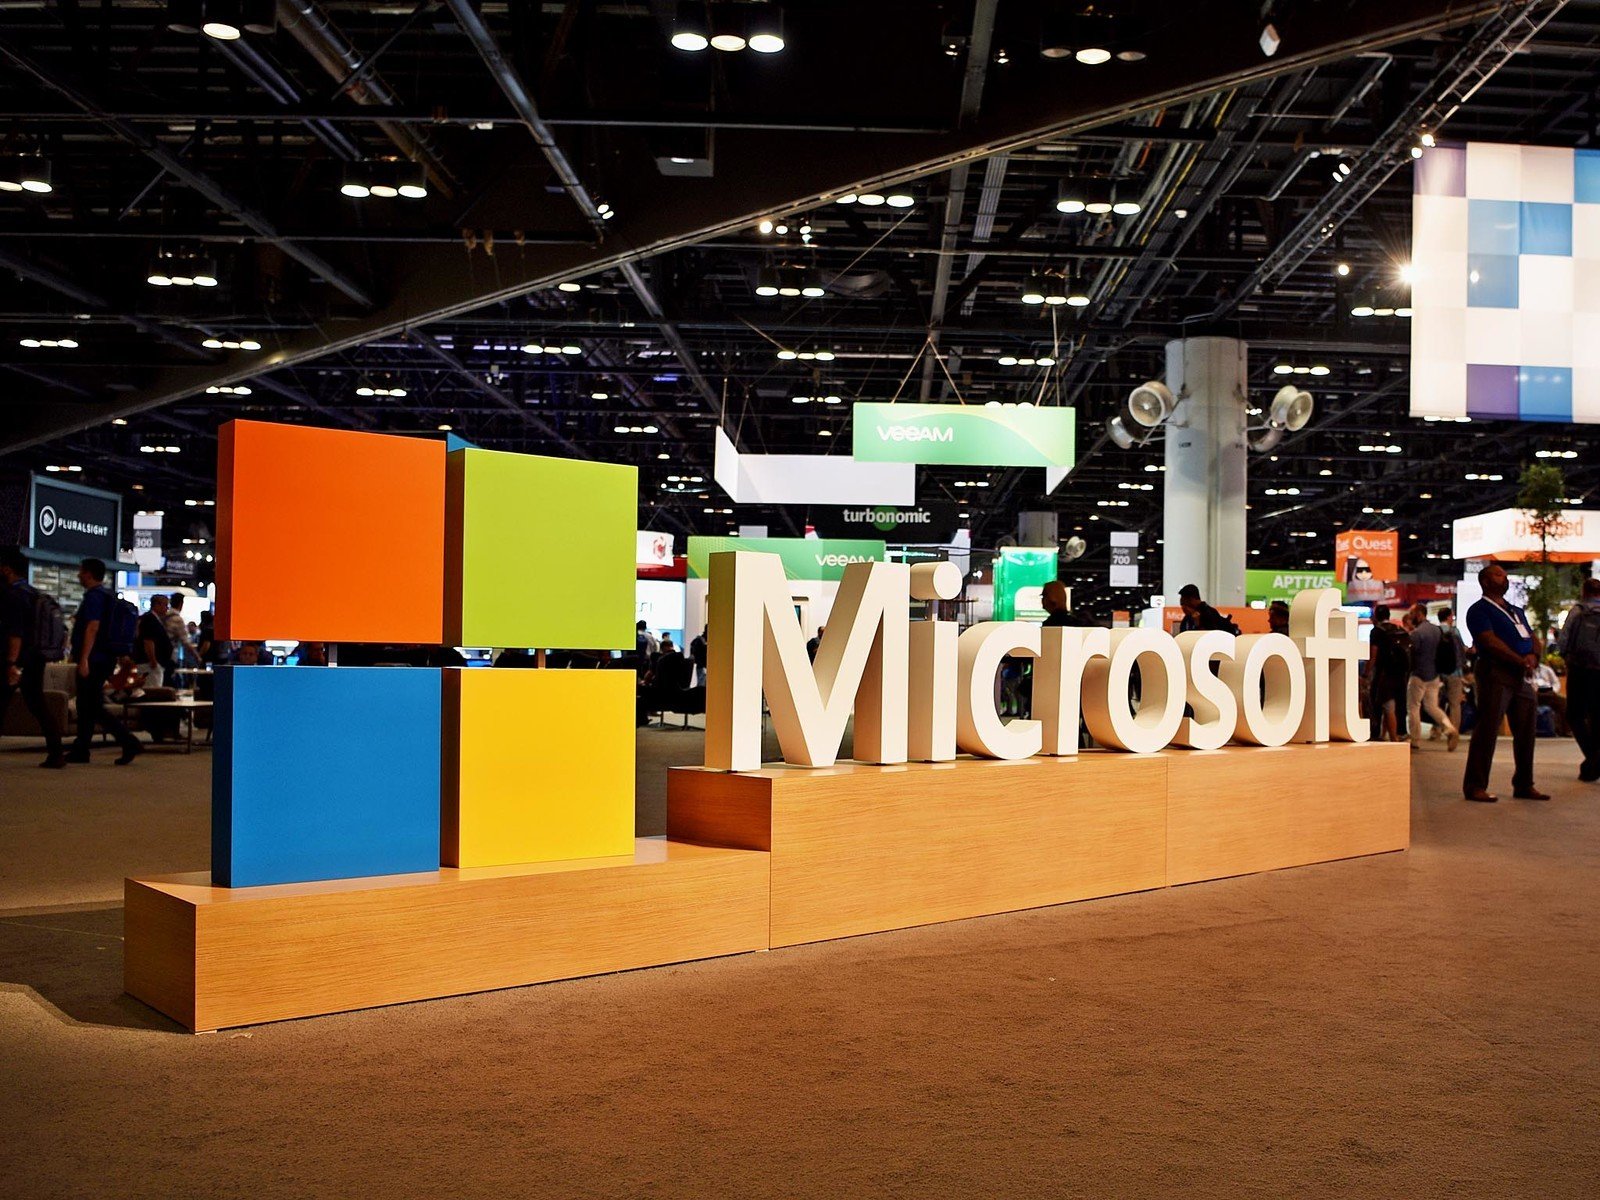 Microsoft reportedly had talks about acquiring GitHub